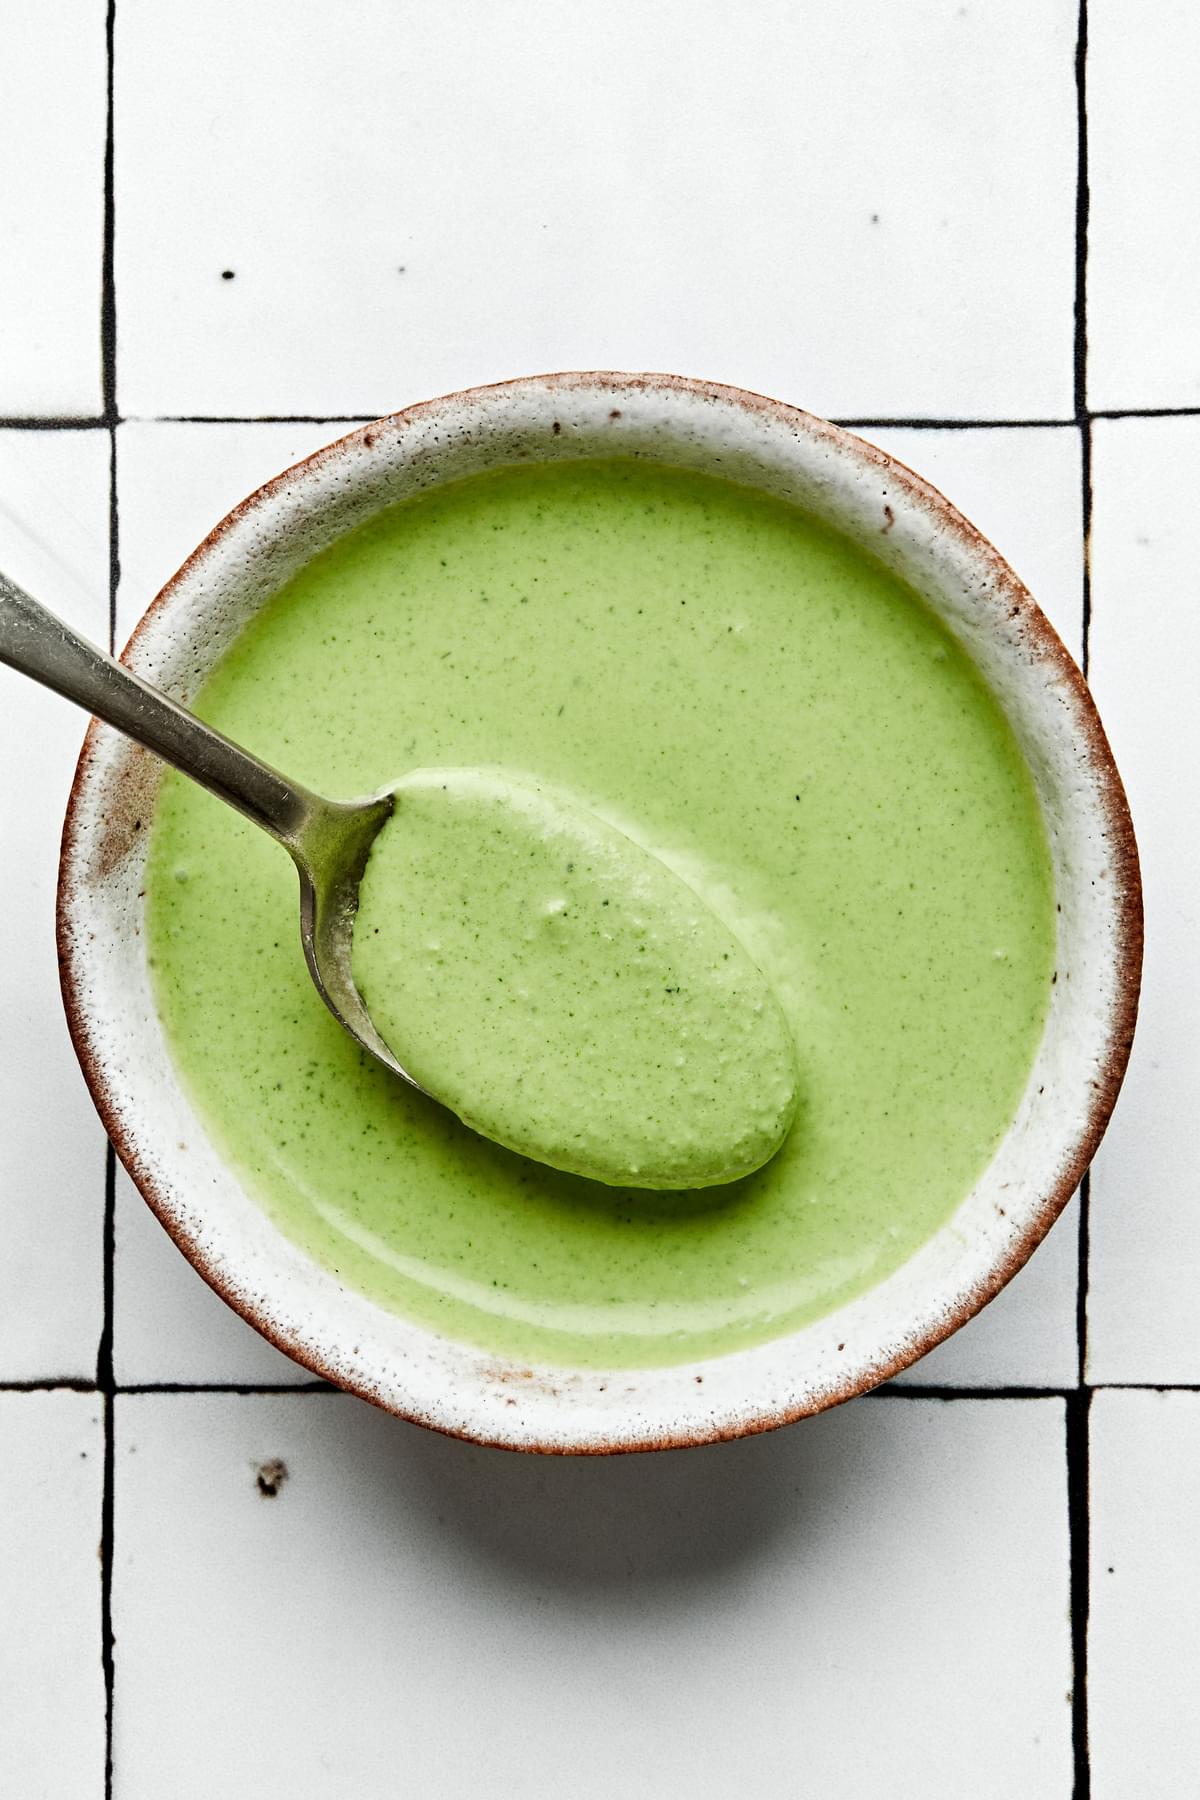 homemade green goddess dressing in a bowl being scooped with a spoon